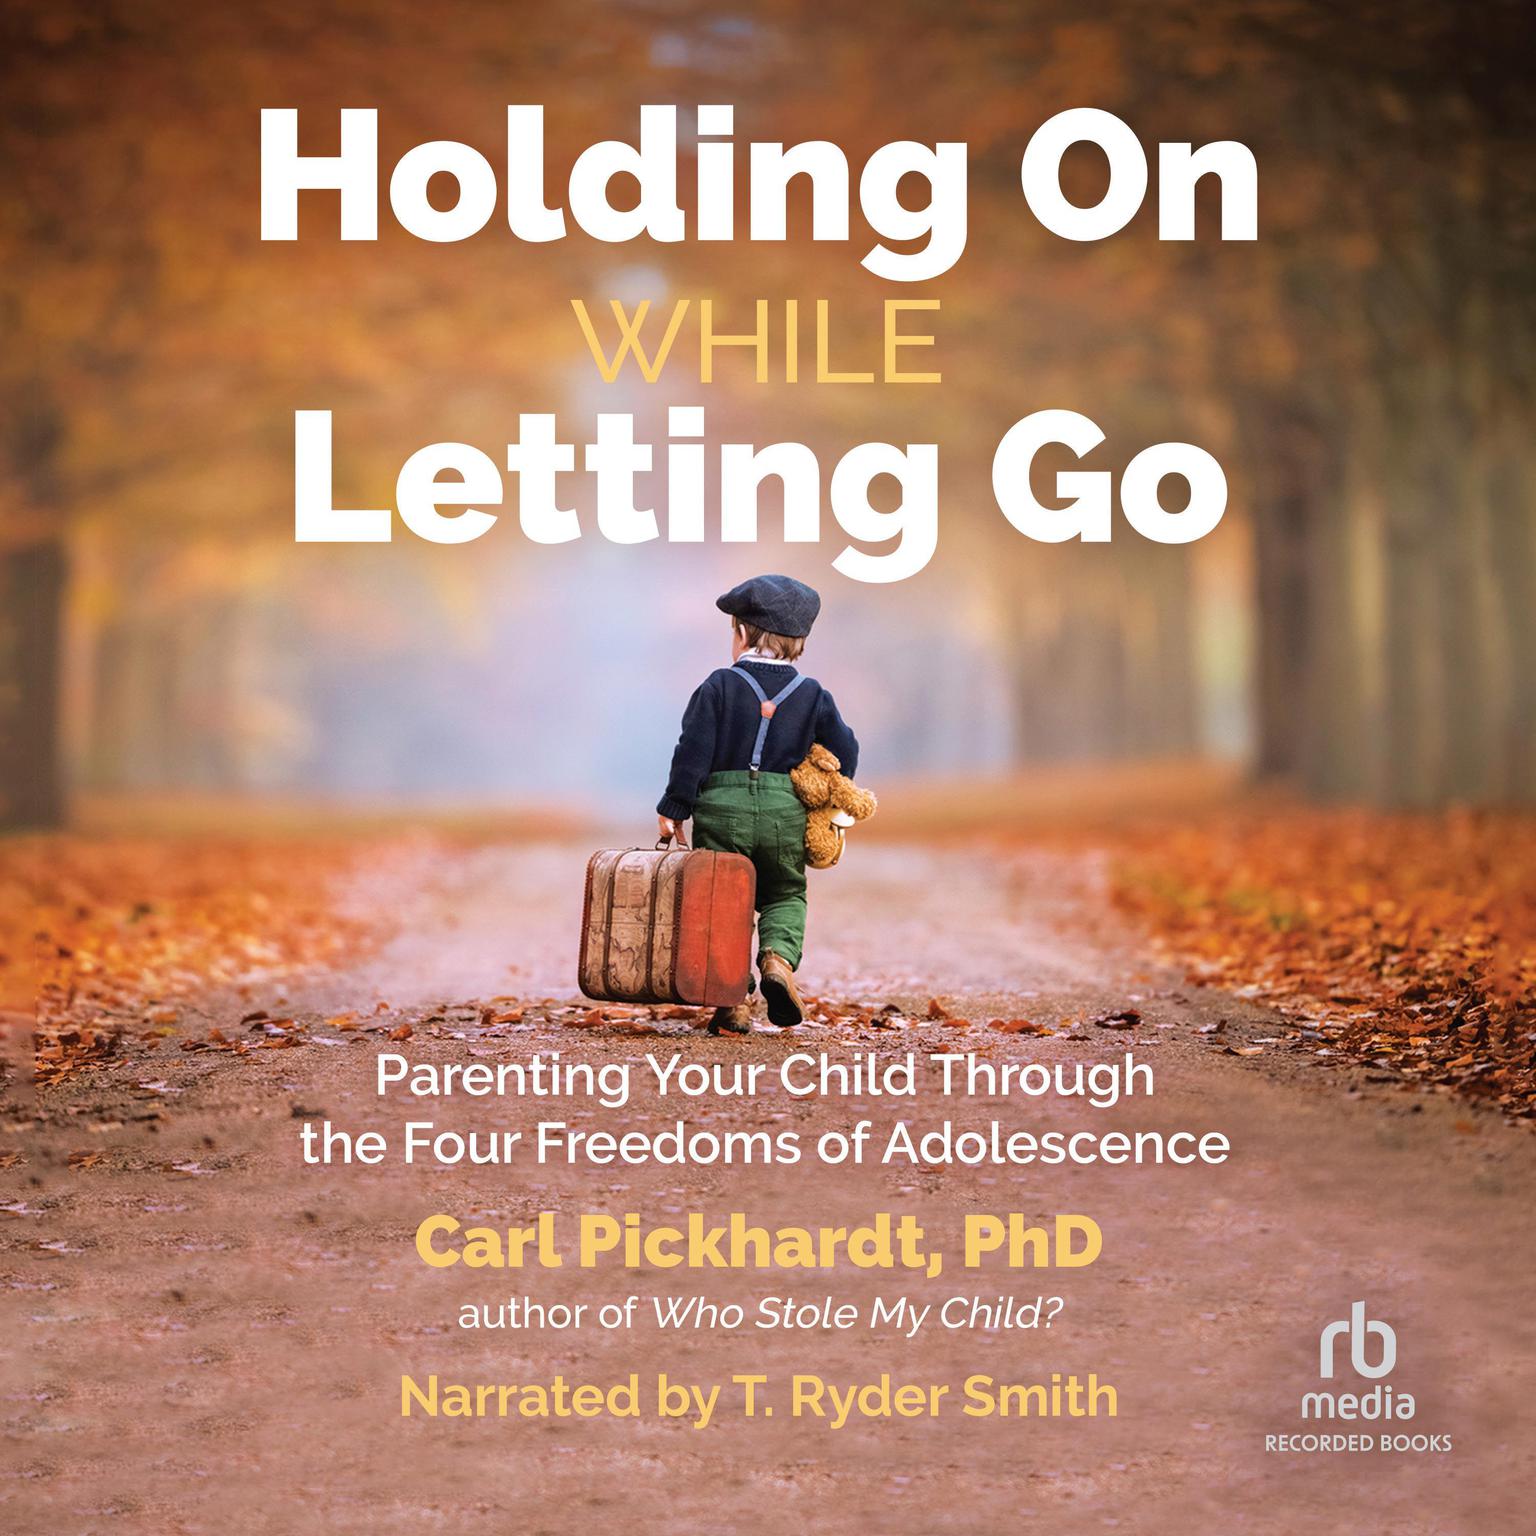 Holding on While Letting Go: Parenting Your Child Through the Four Freedoms of Adolescence Audiobook, by Carl Pickhardt